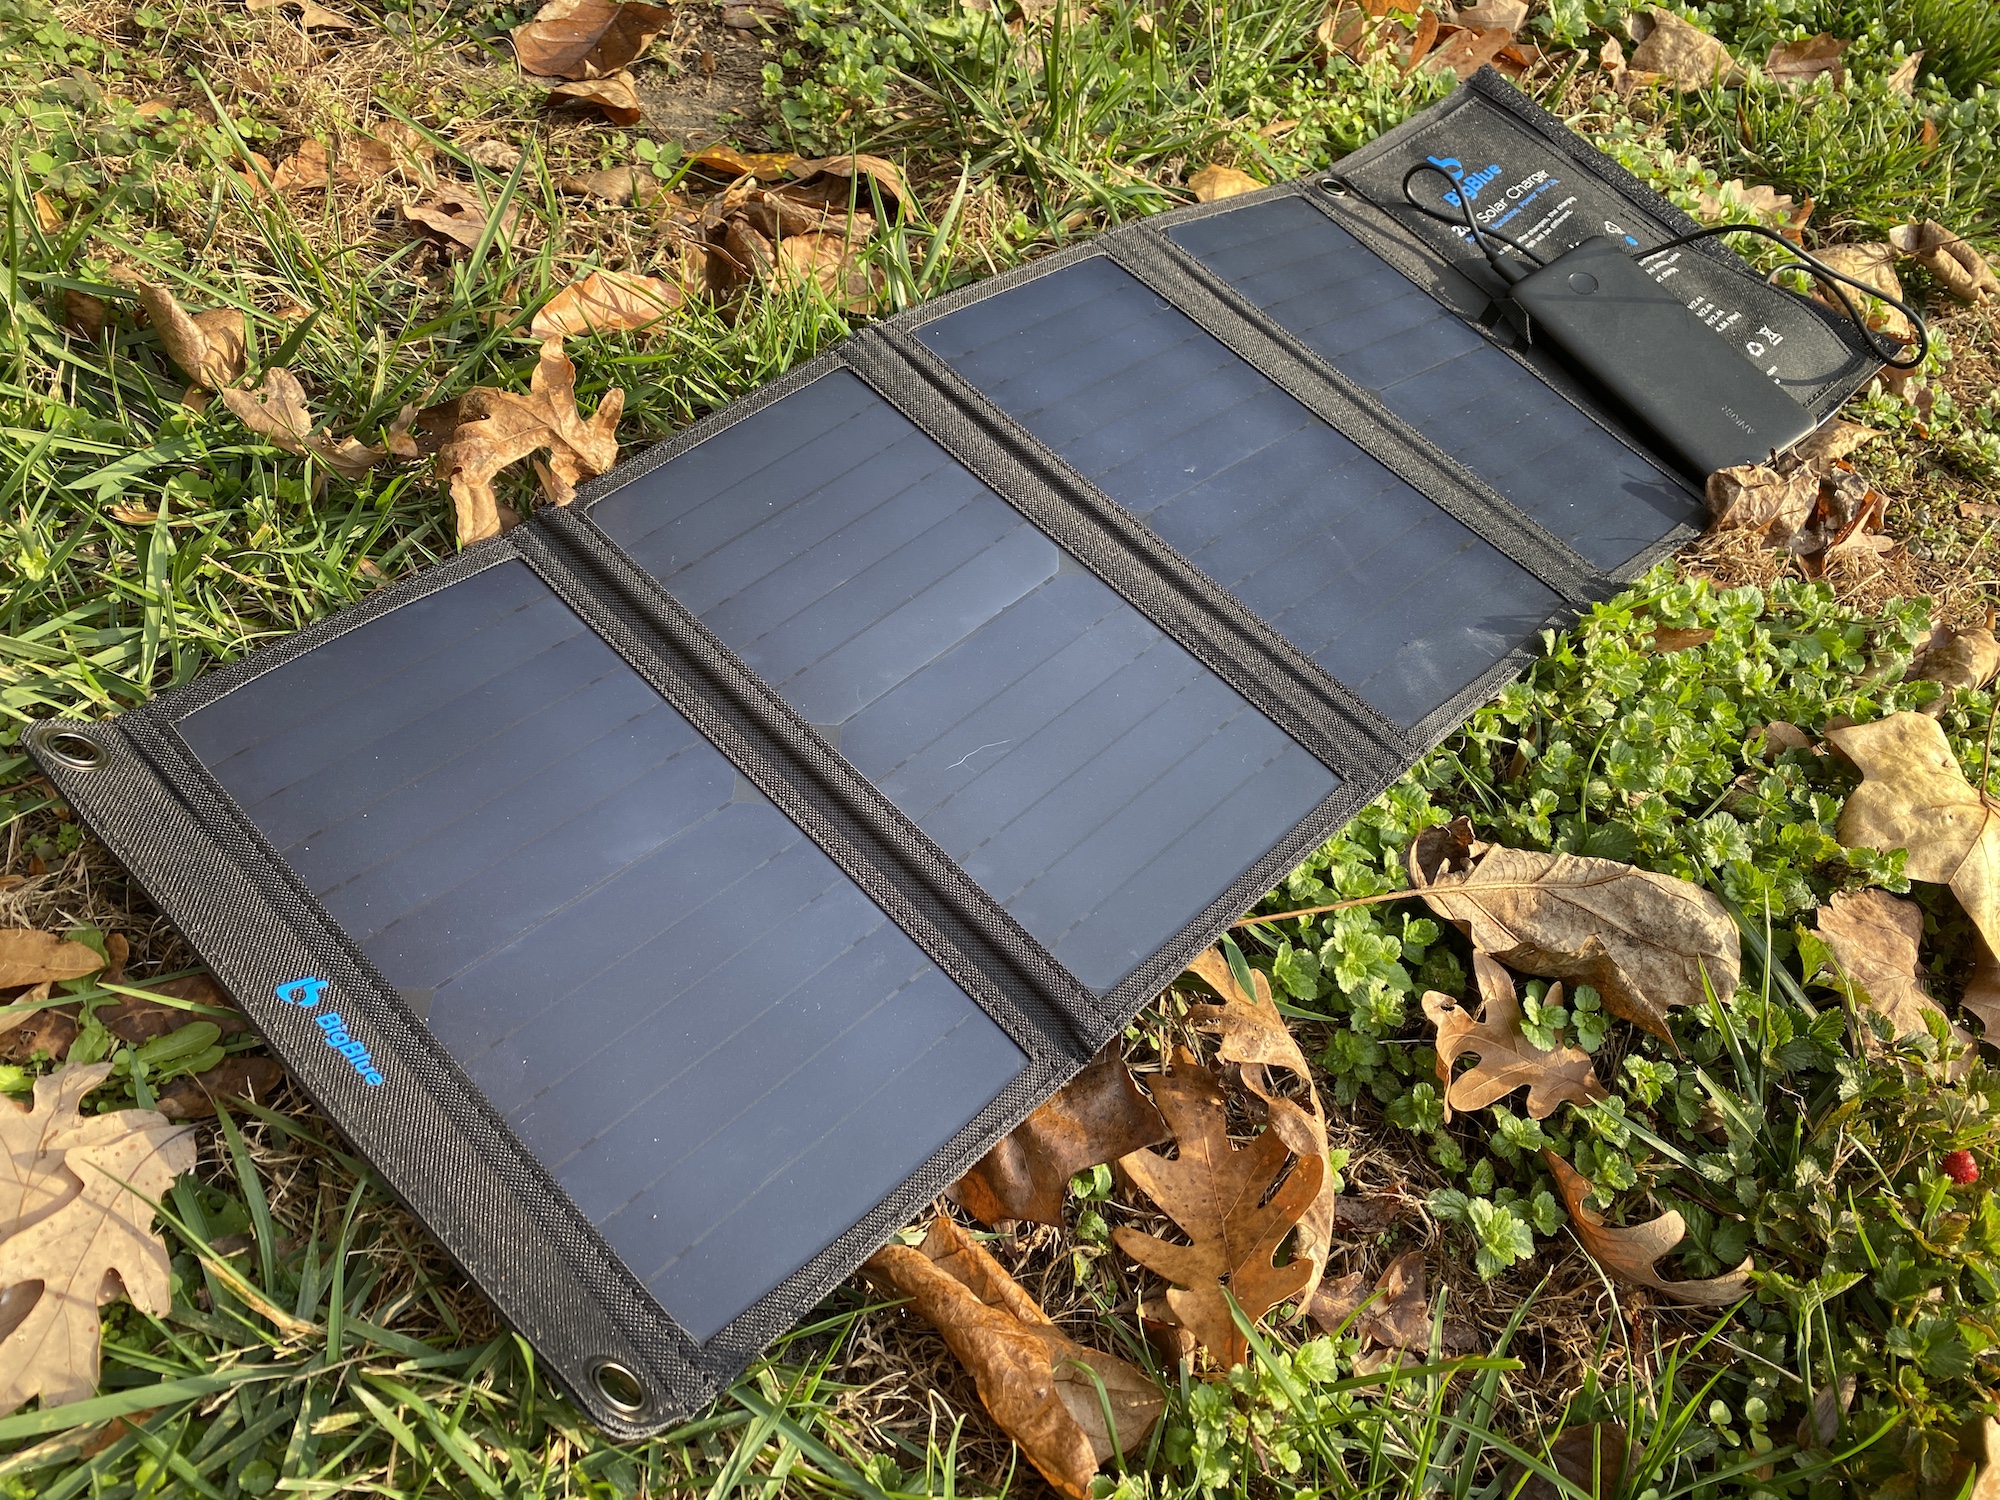 A solar charger in the grass charging a power bank